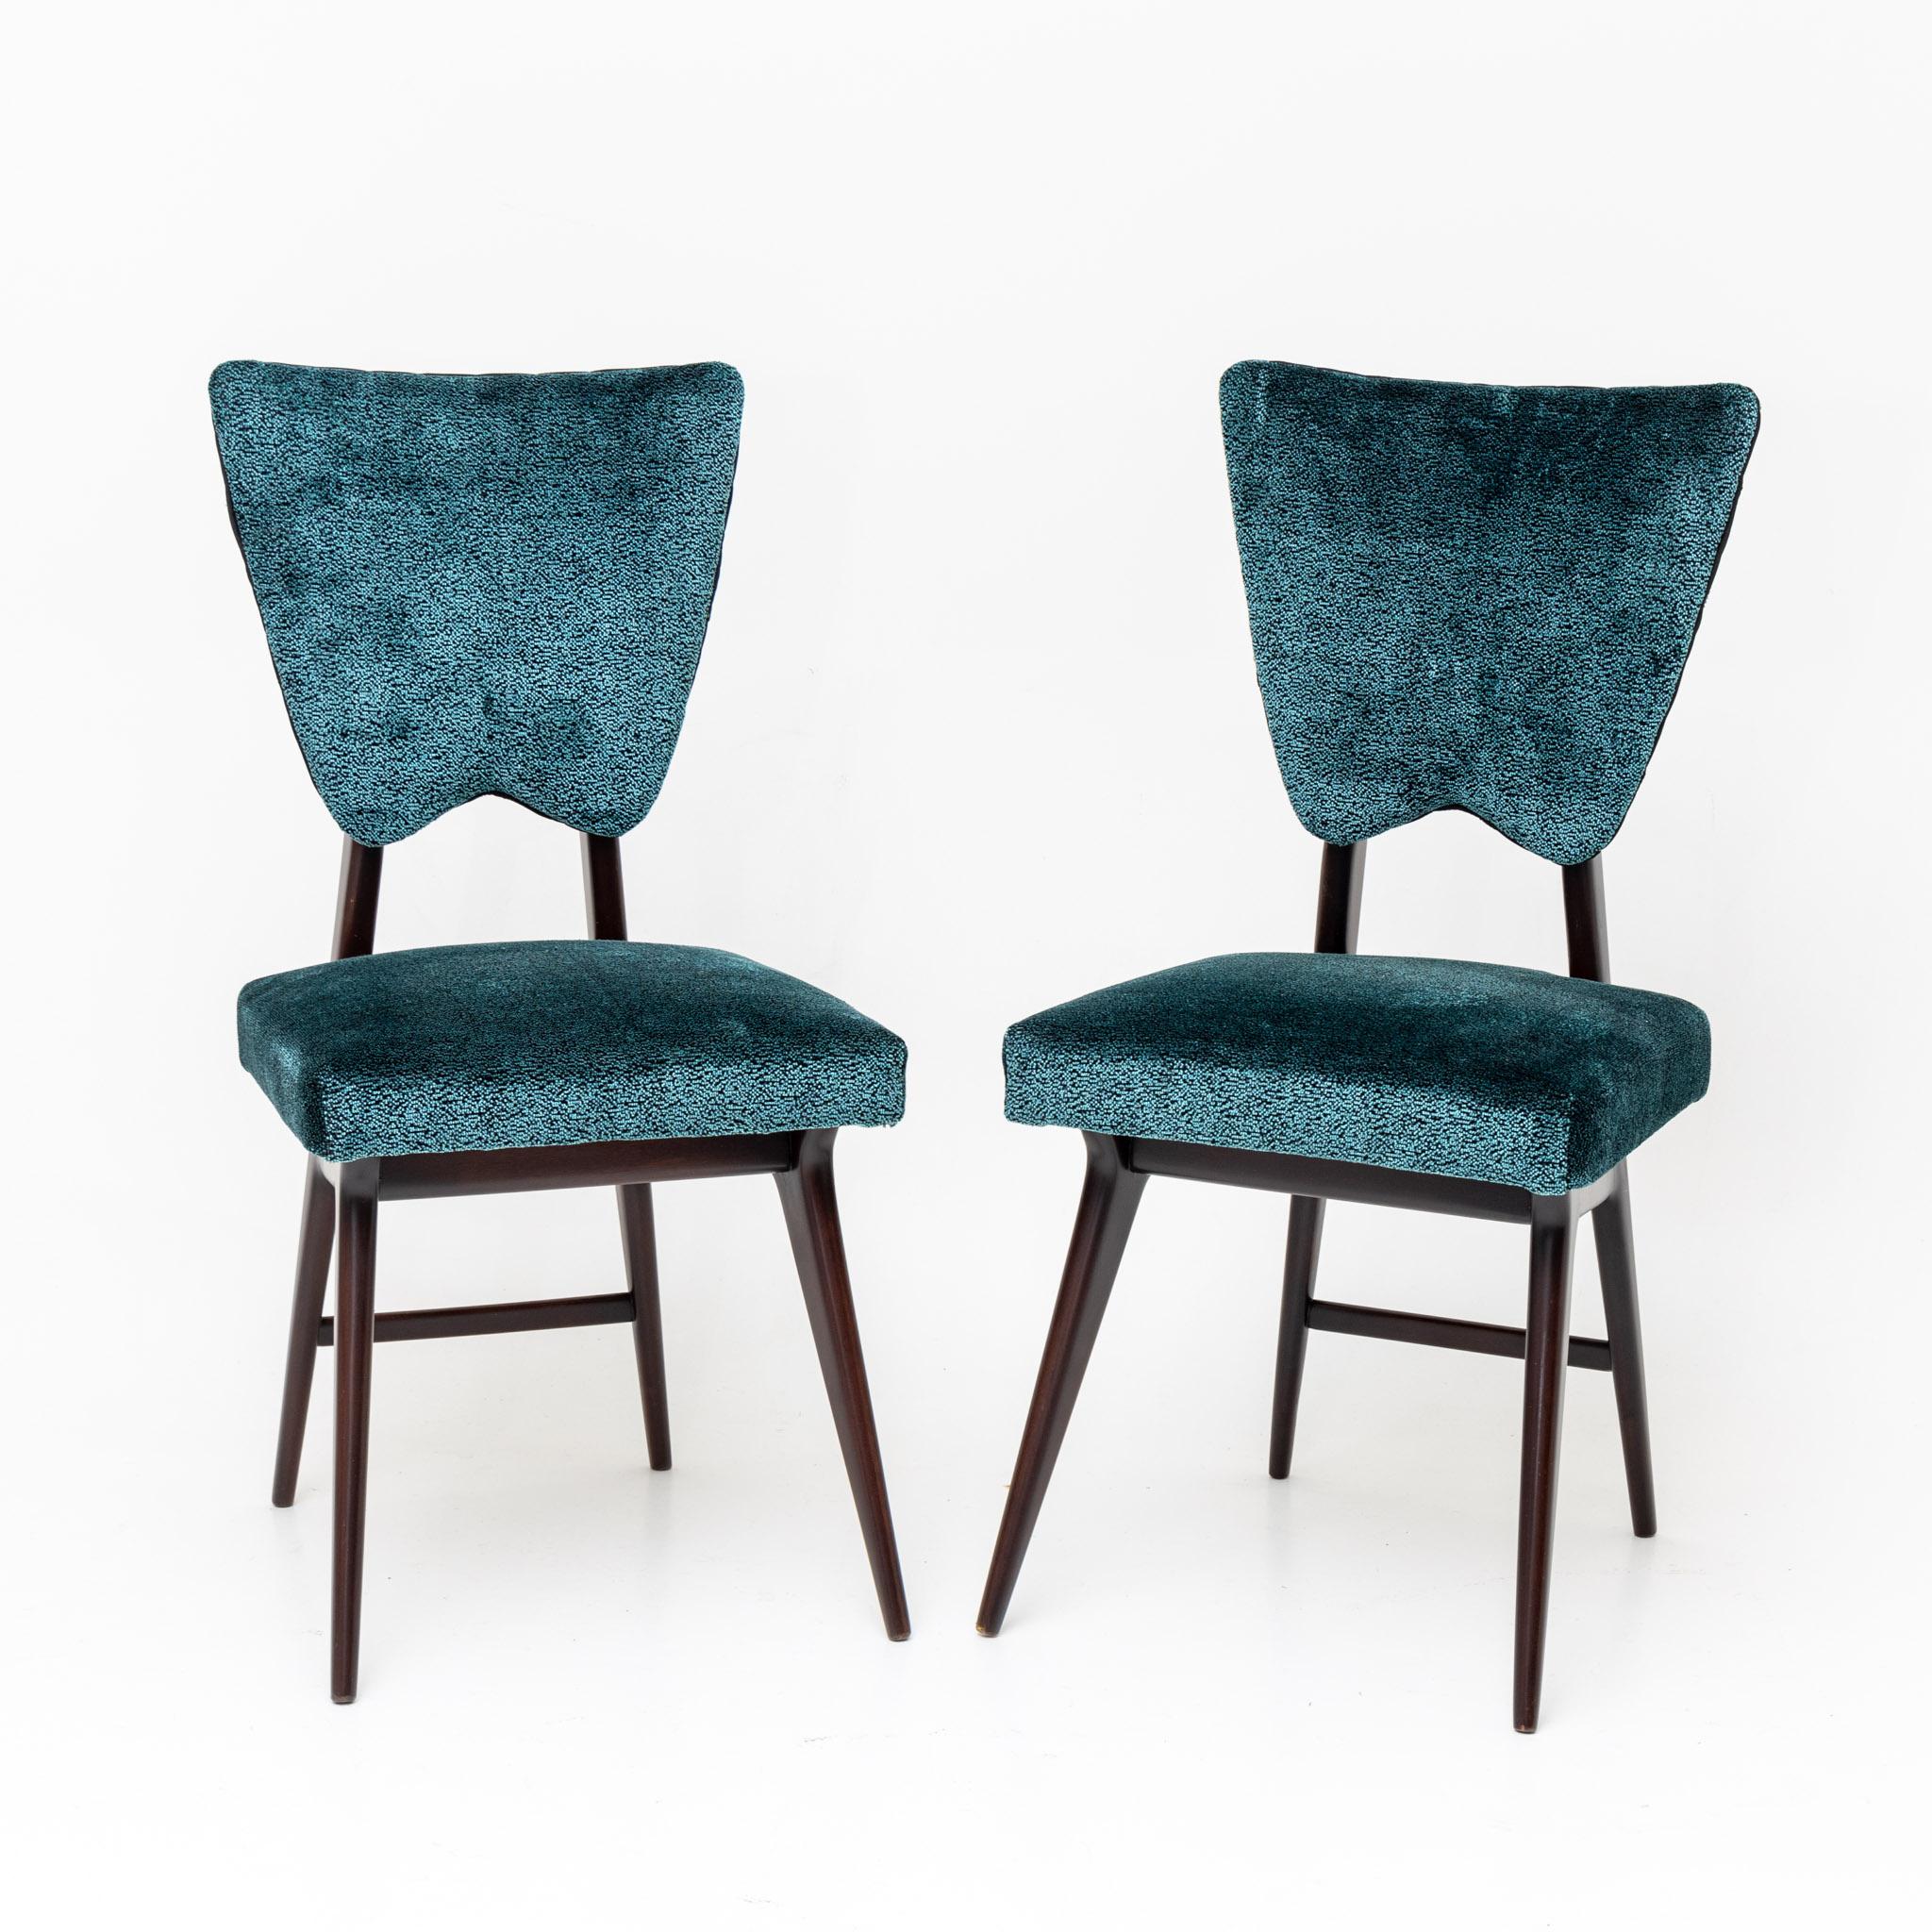 Modern Set of six Dining room chairs, Black and Blue Cover, Italian manufactory, 1950s